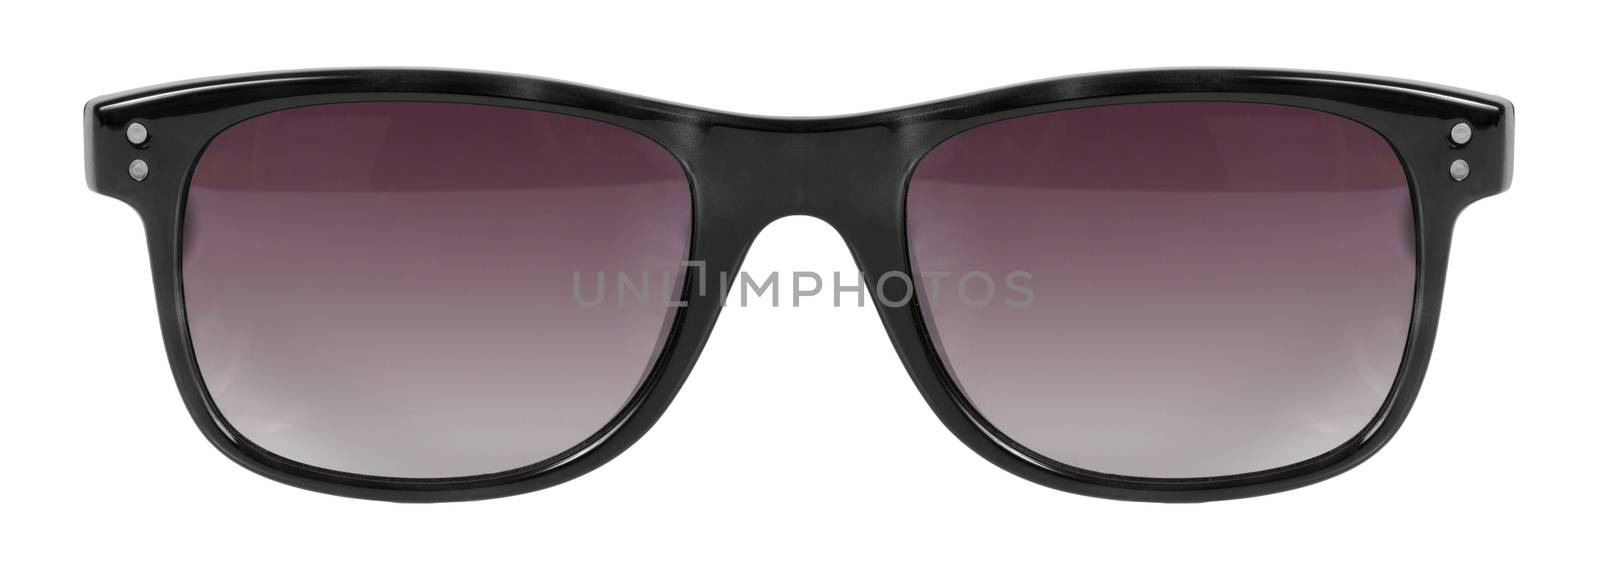 Sunglasses black frame and red color lens isolated against a clean white background nobody